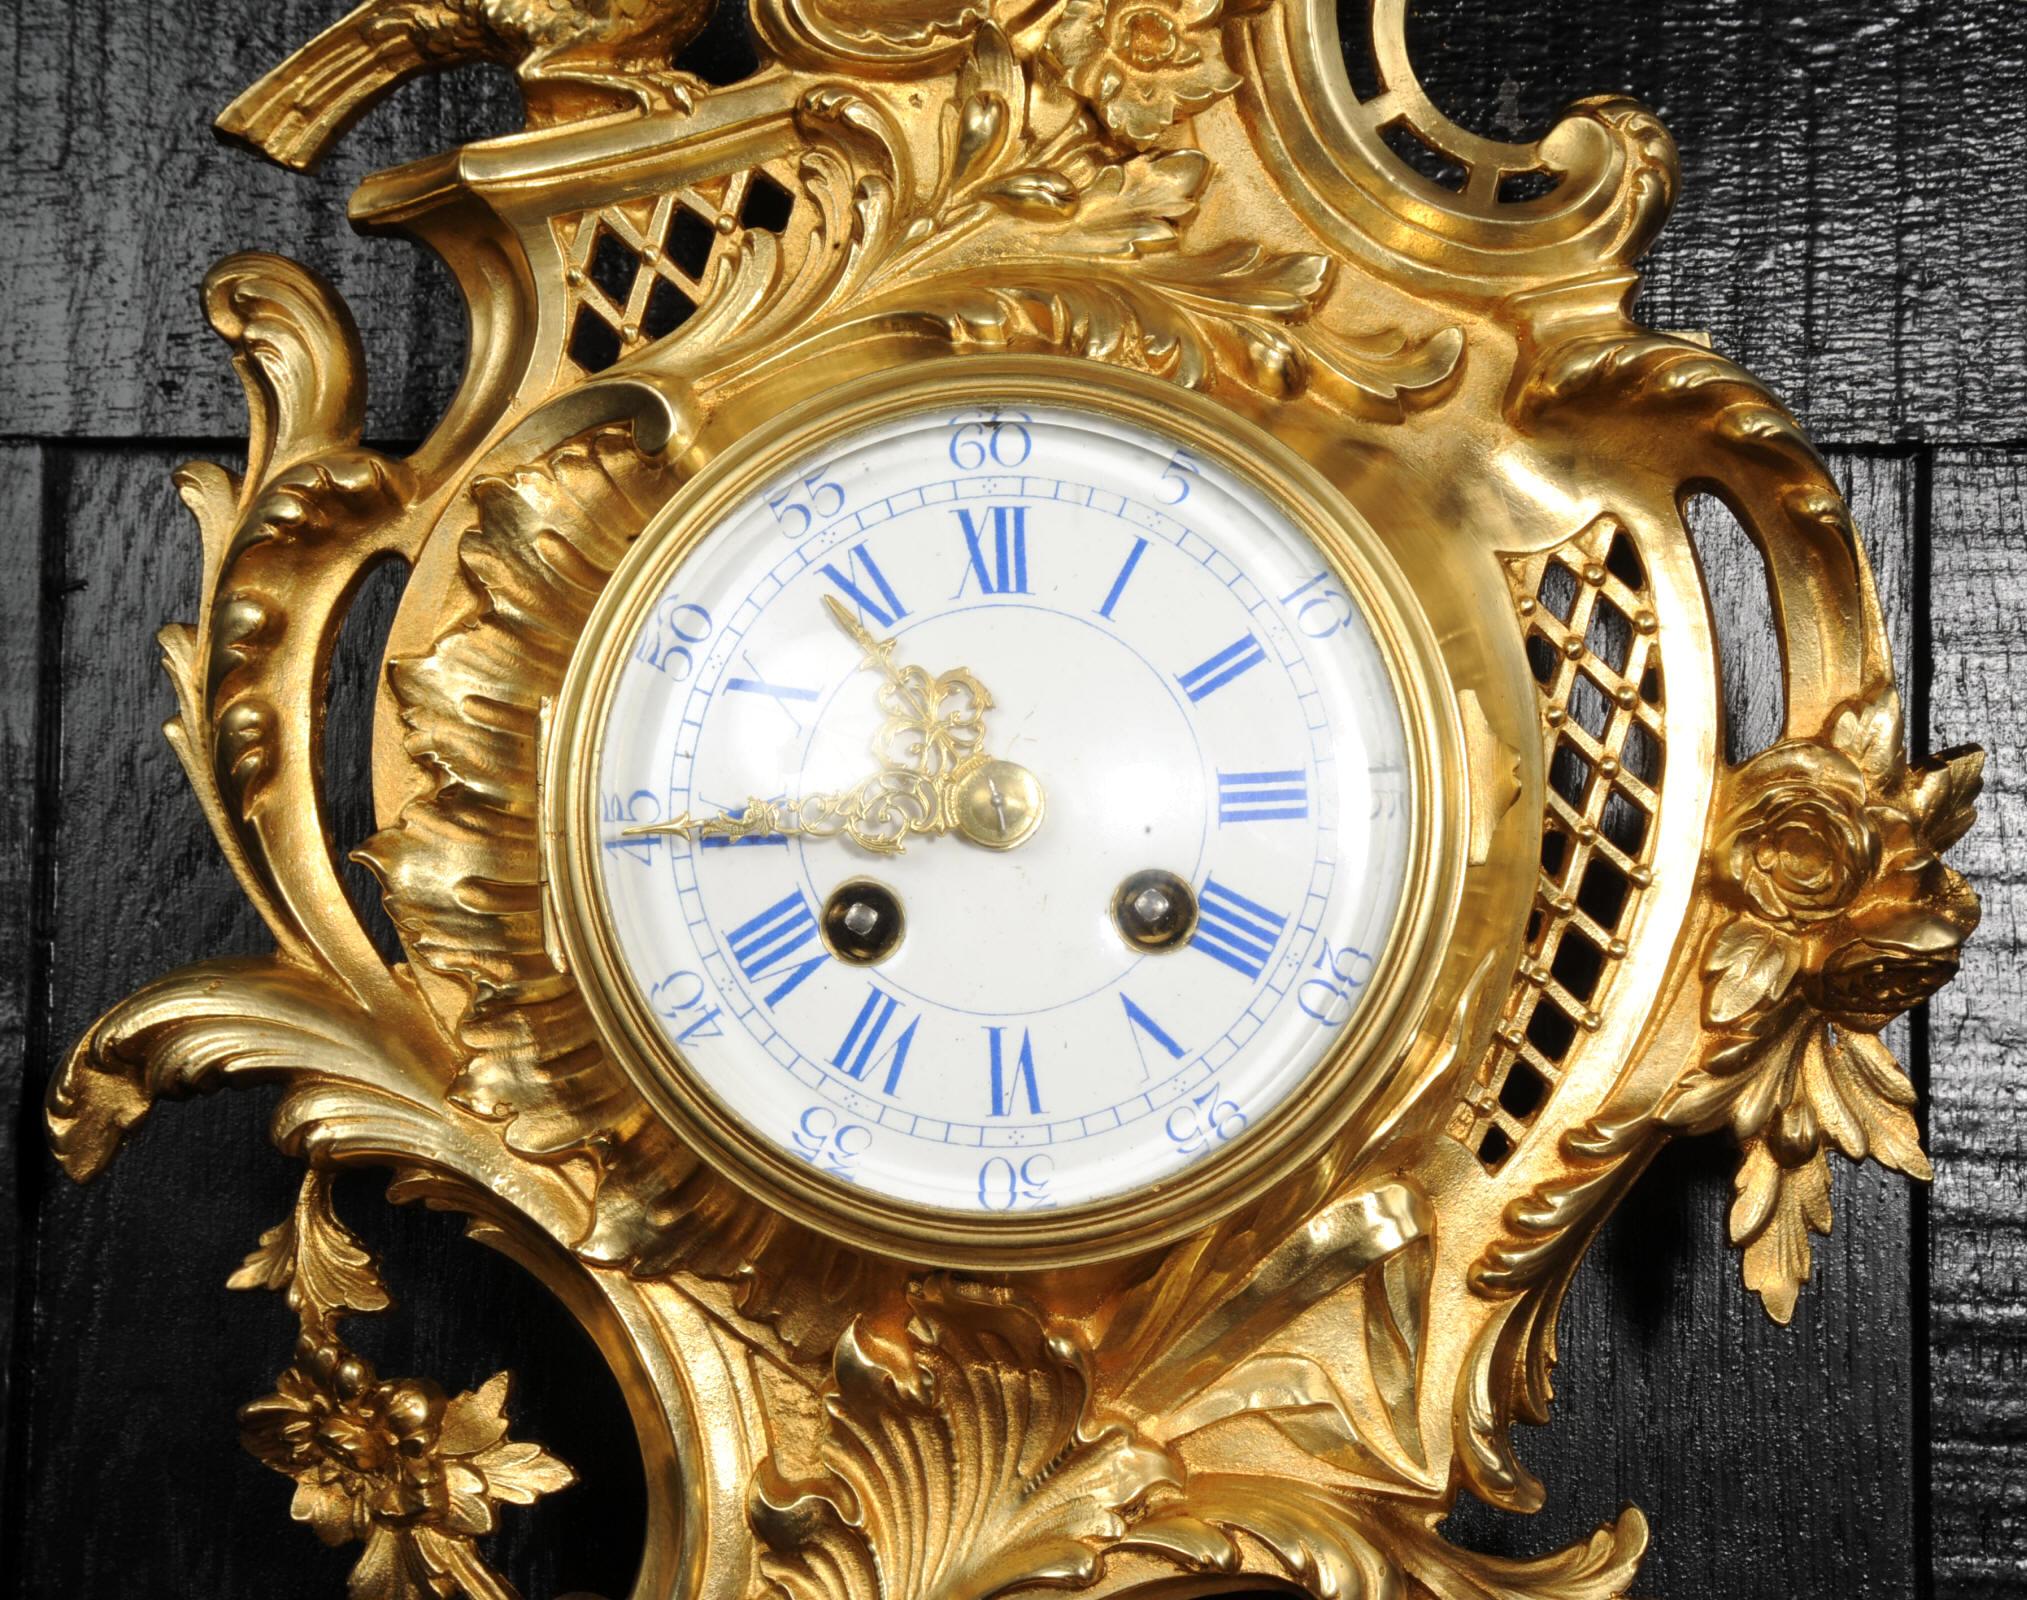 19th Century Antique French Gilt Bronze Rococo Cartel Wall Clock by Japy Freres